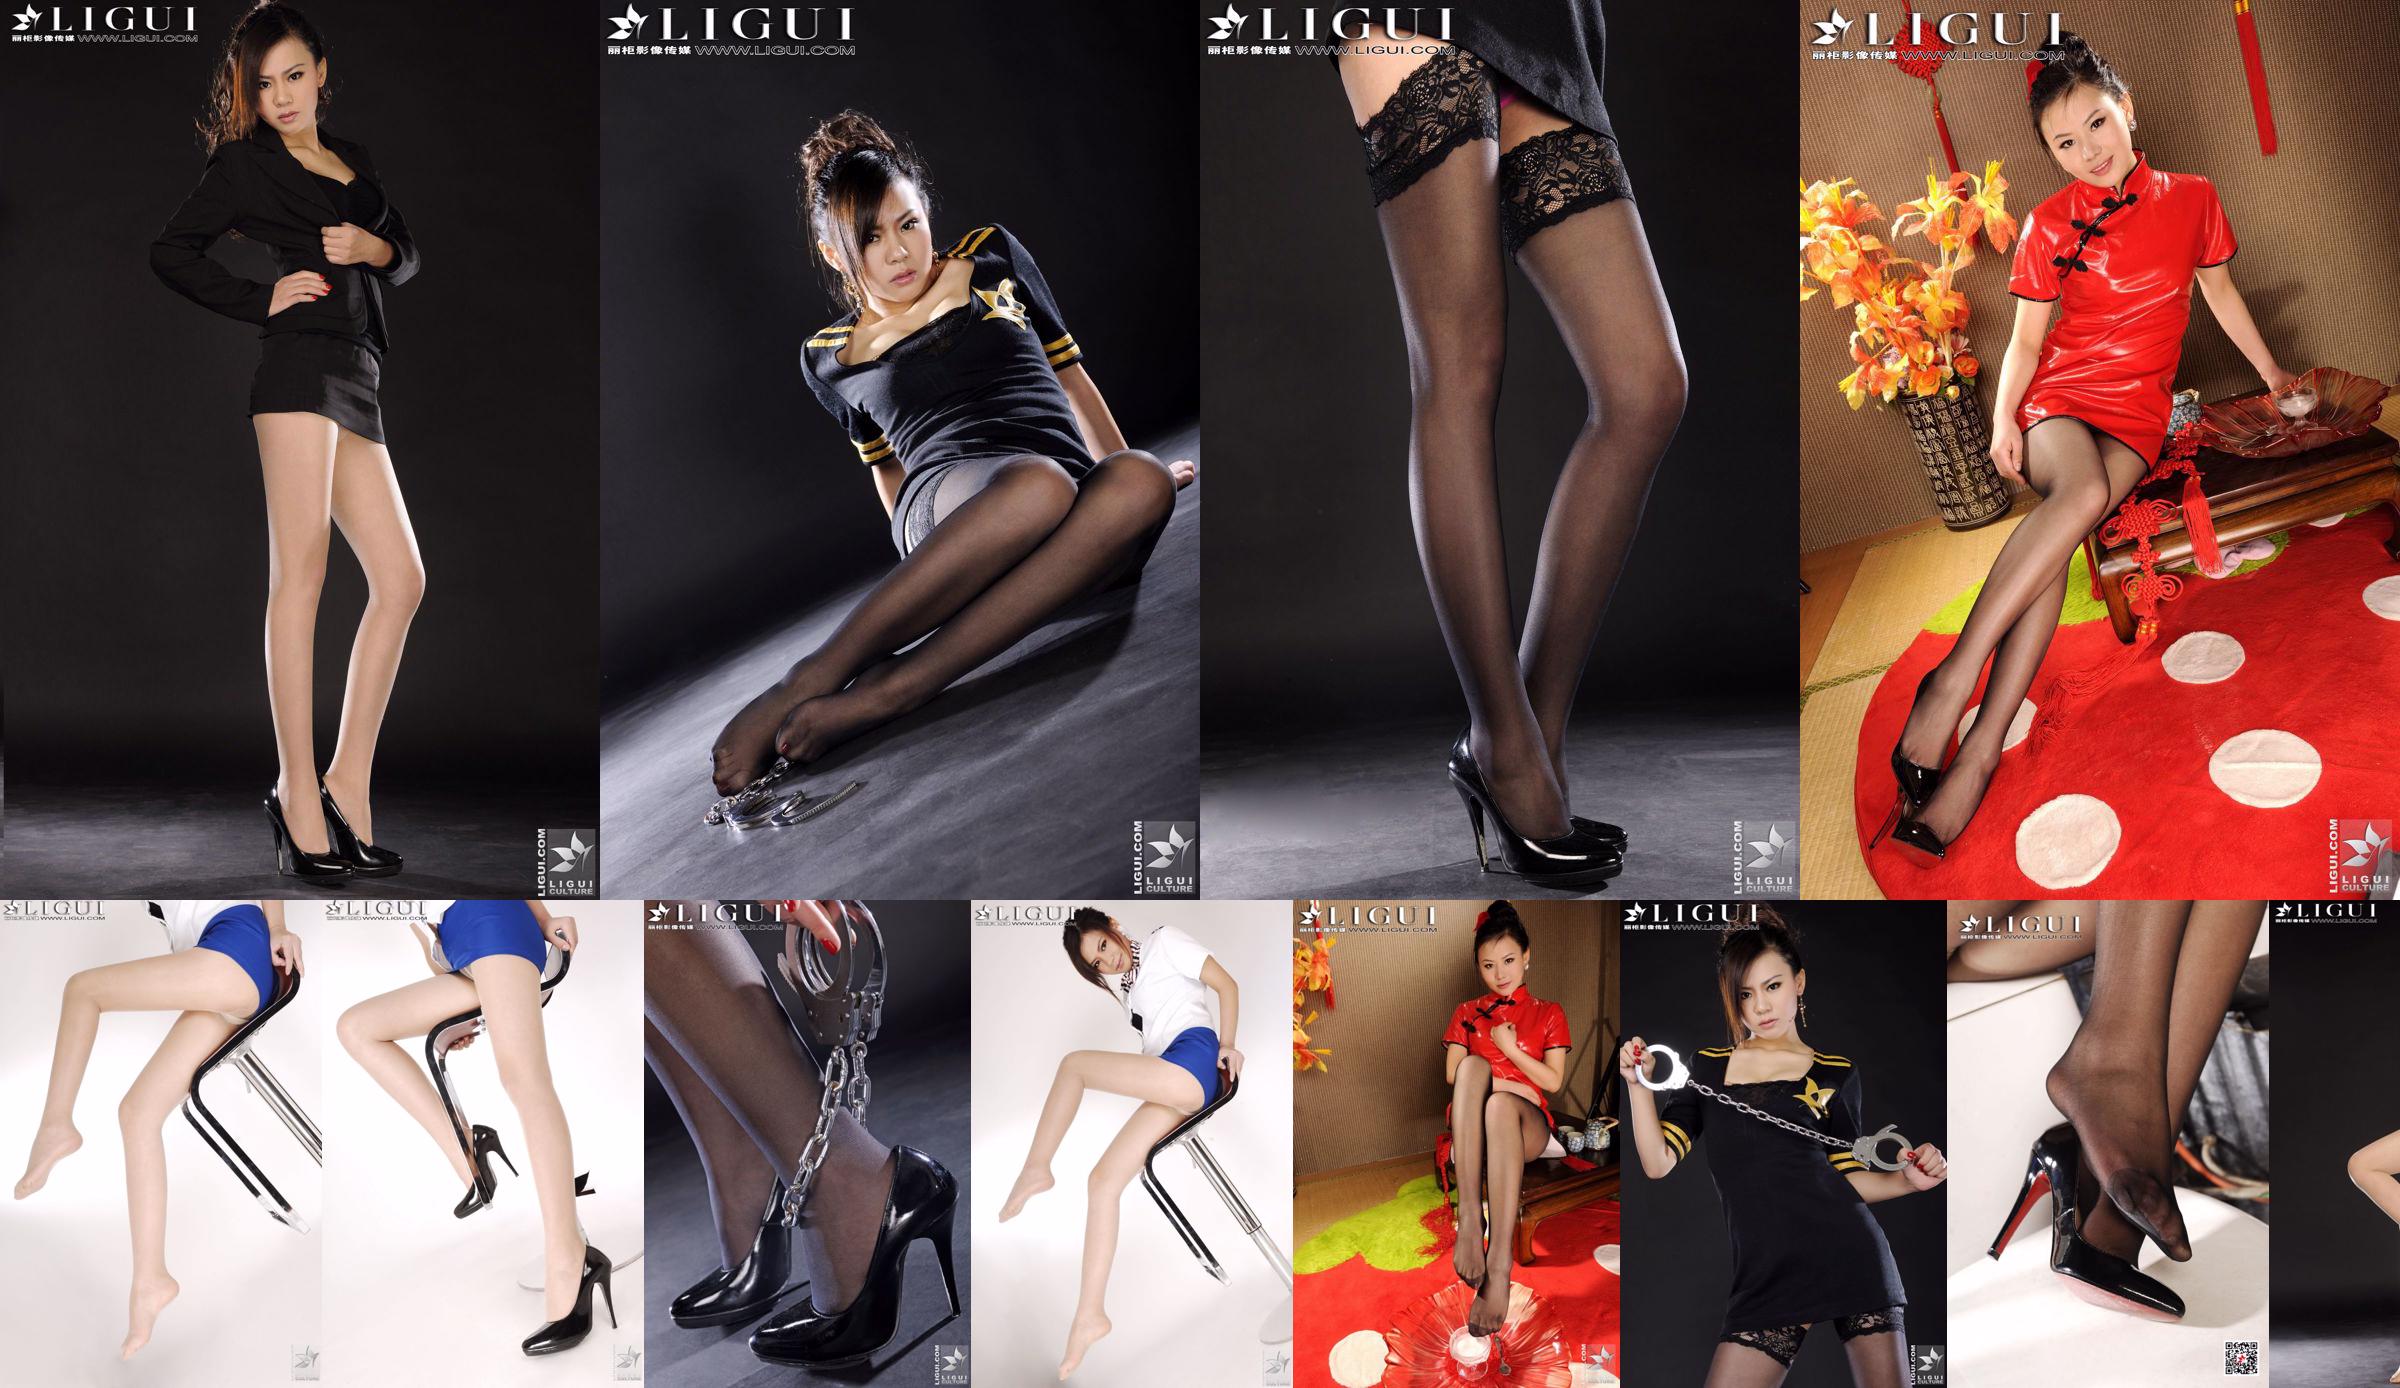 Model Sophie "Sexy Beauty Stewardess" [Ligui LiGui] Beautiful legs and jade feet photo picture No.ae92c4 Page 2